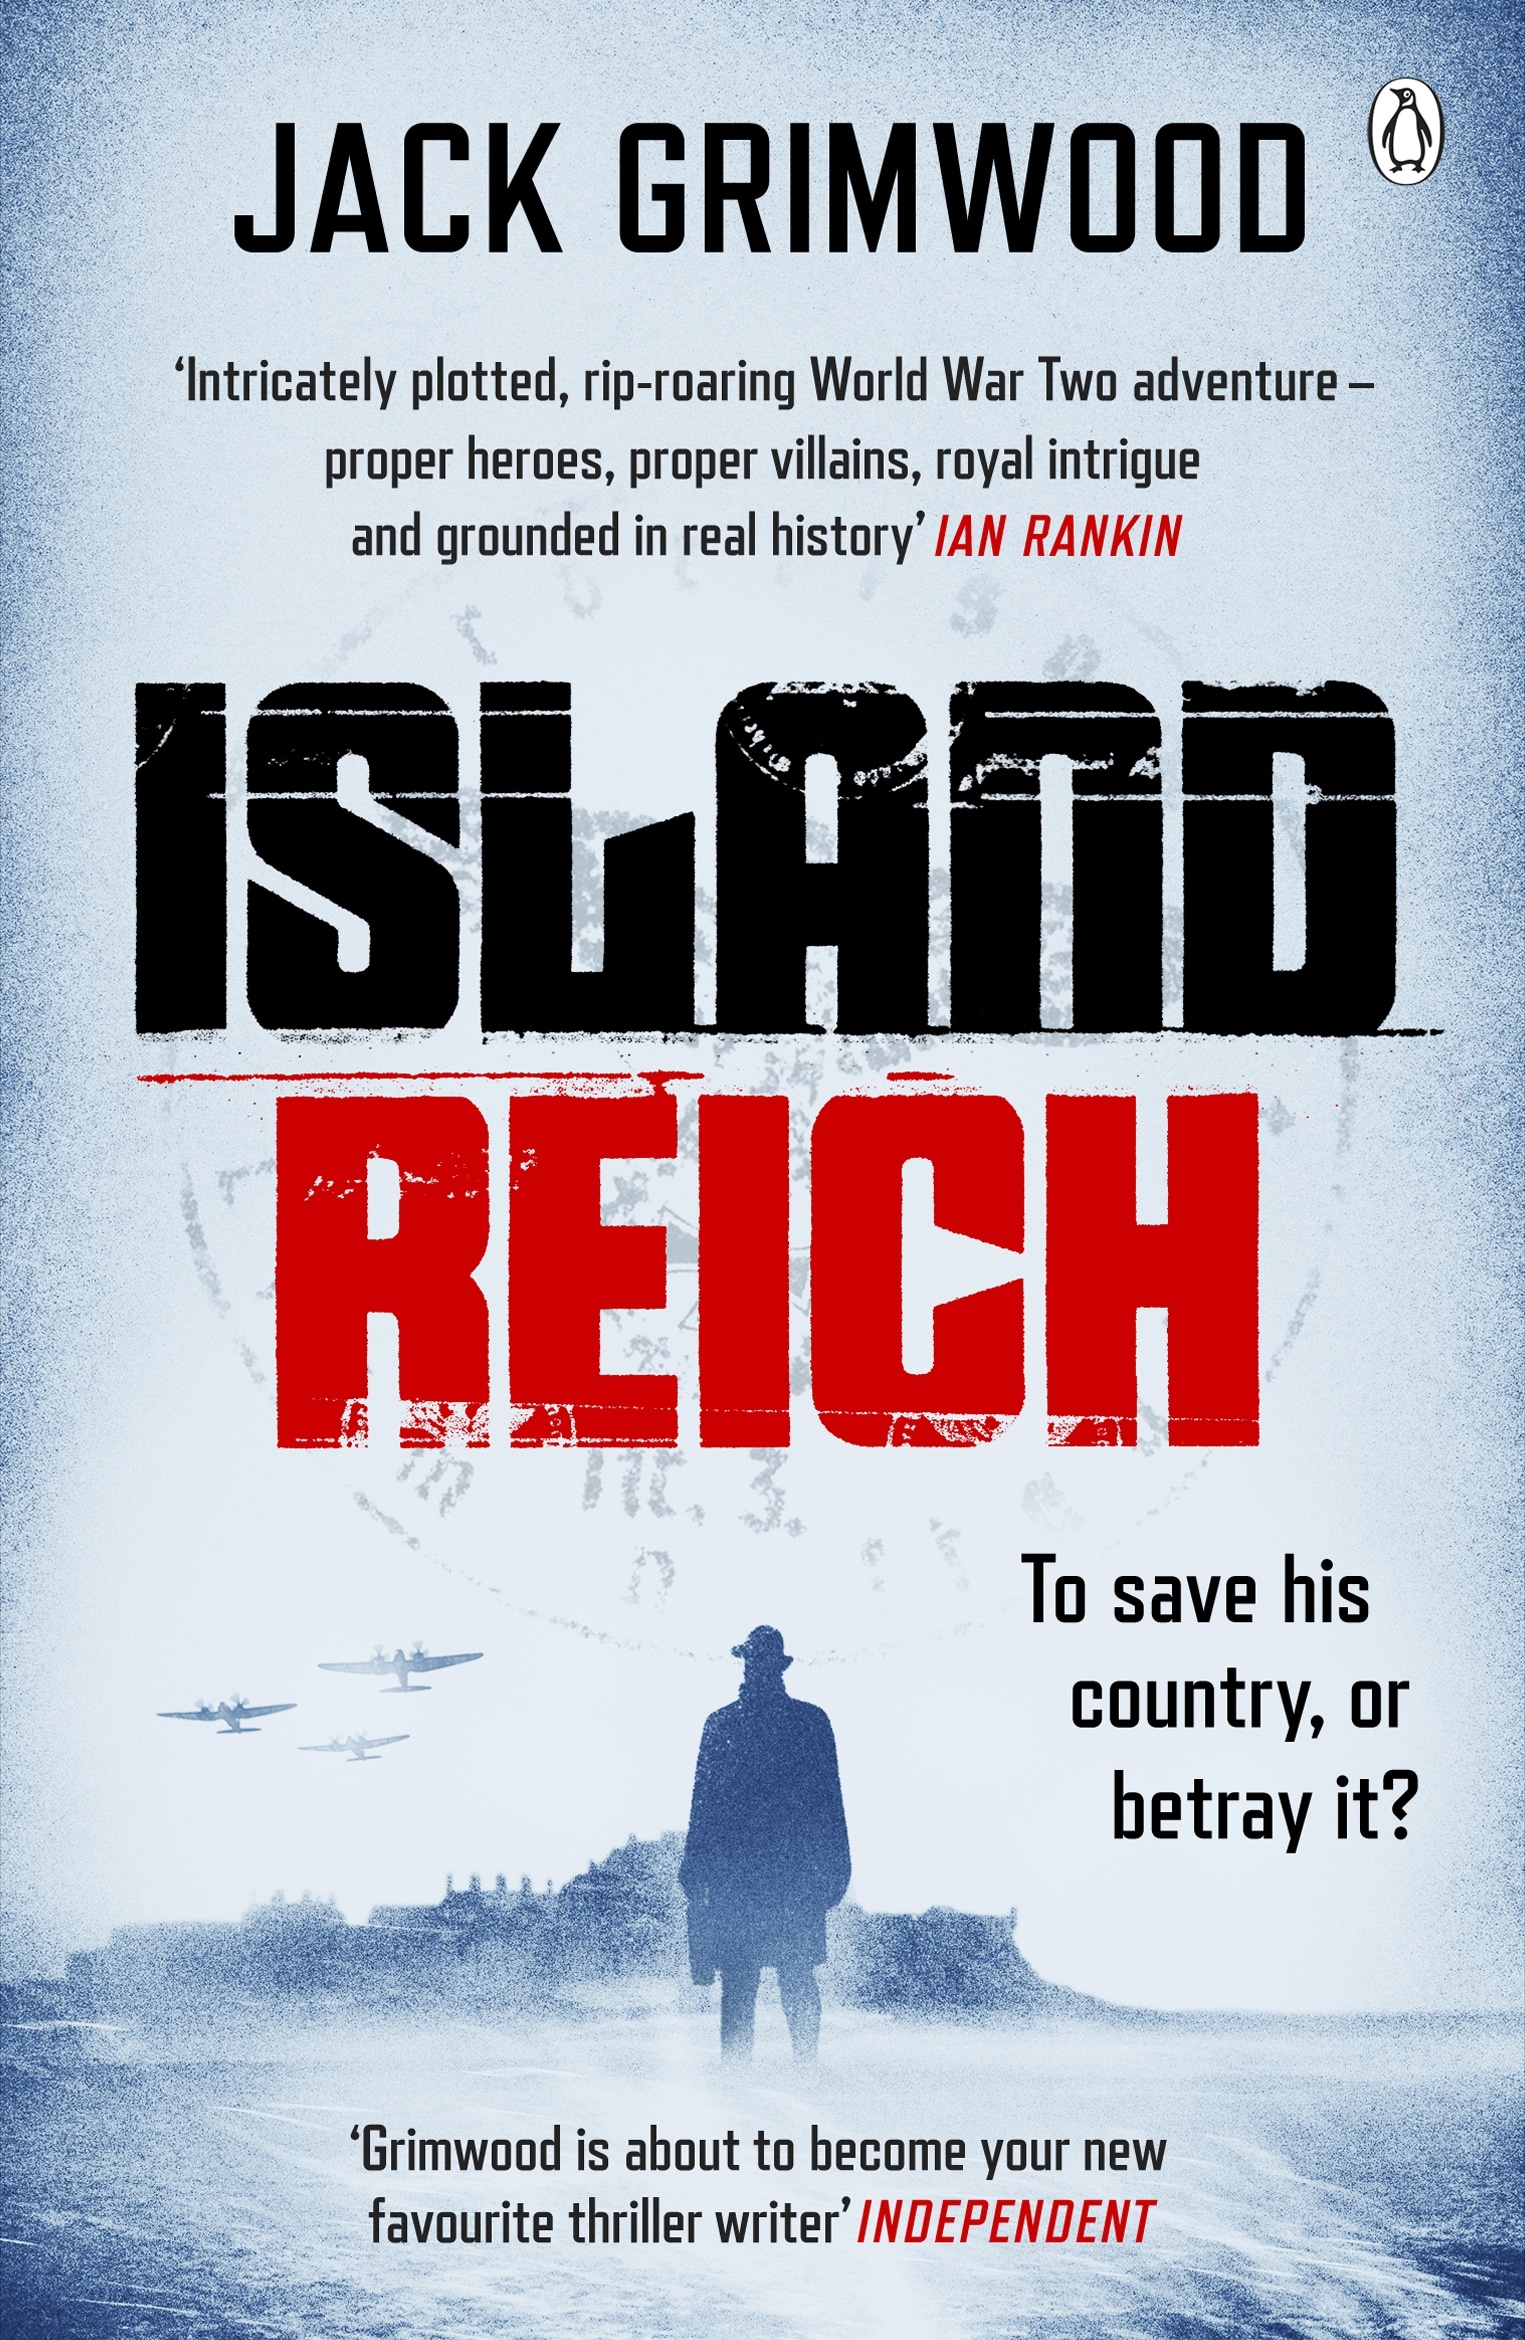 Book “Island Reich” by Jack Grimwood — October 28, 2021